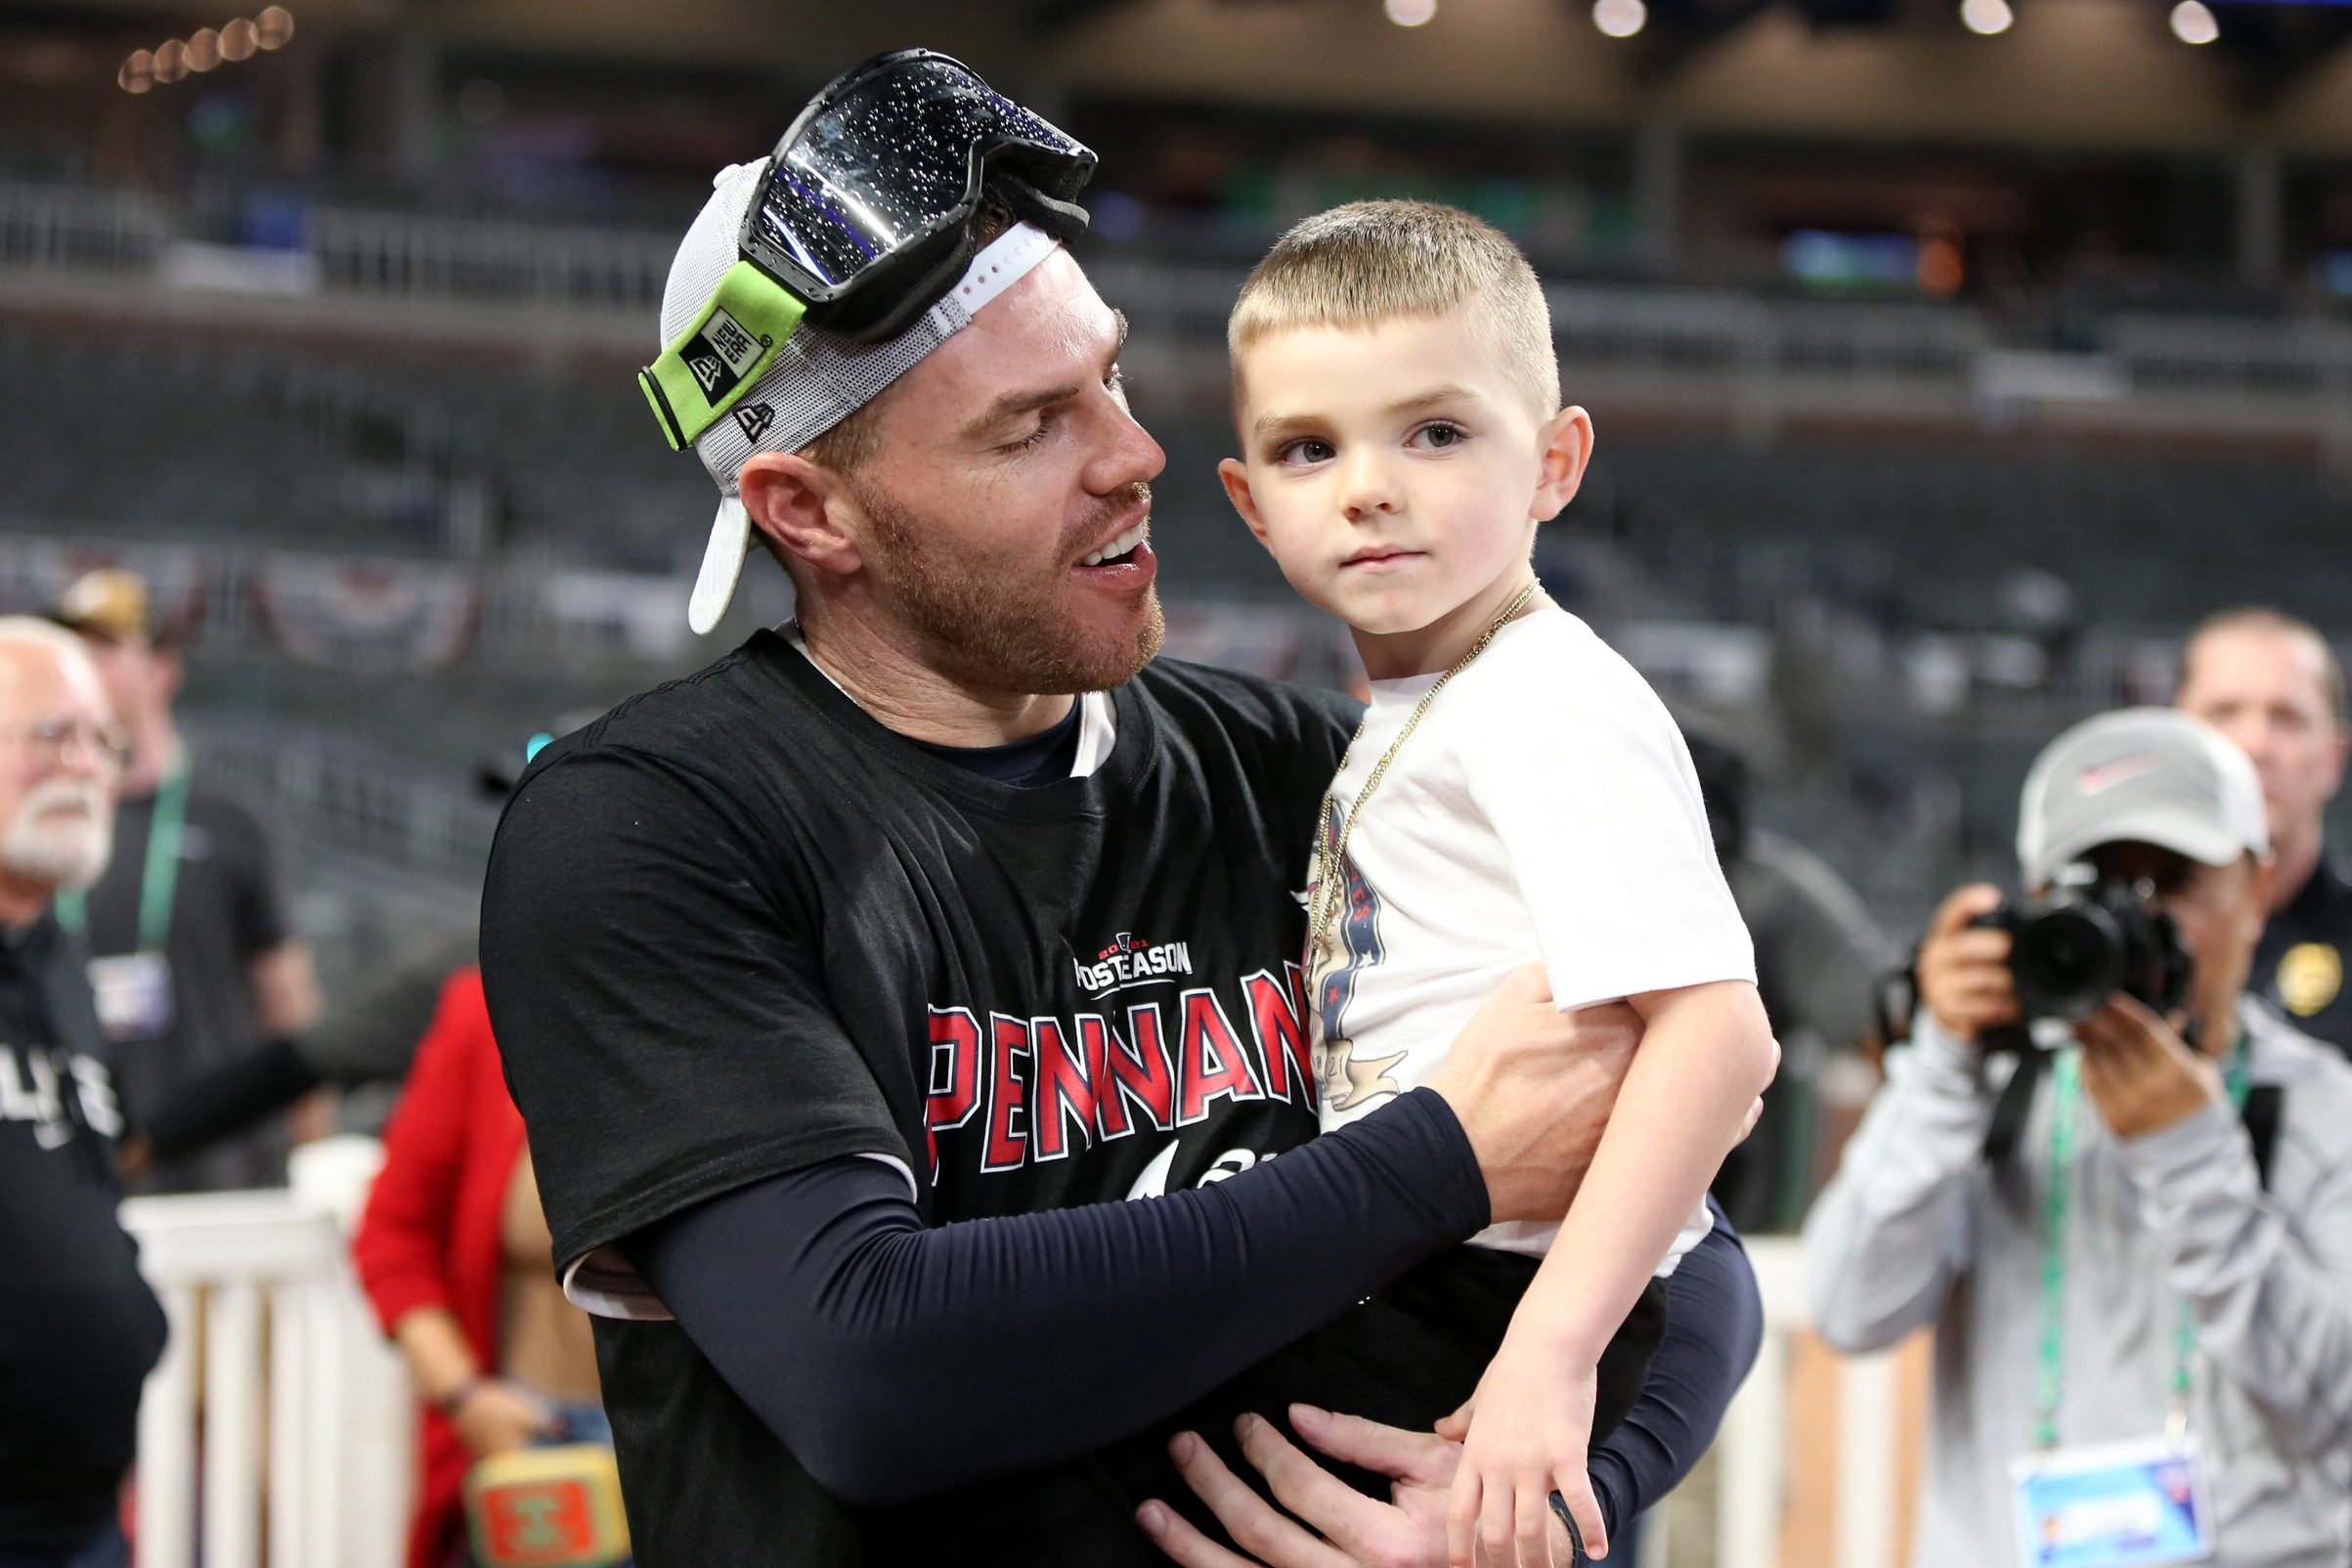 Freddie Freeman's son reuniting with Blooper at MLB All-Star game is  adorable!